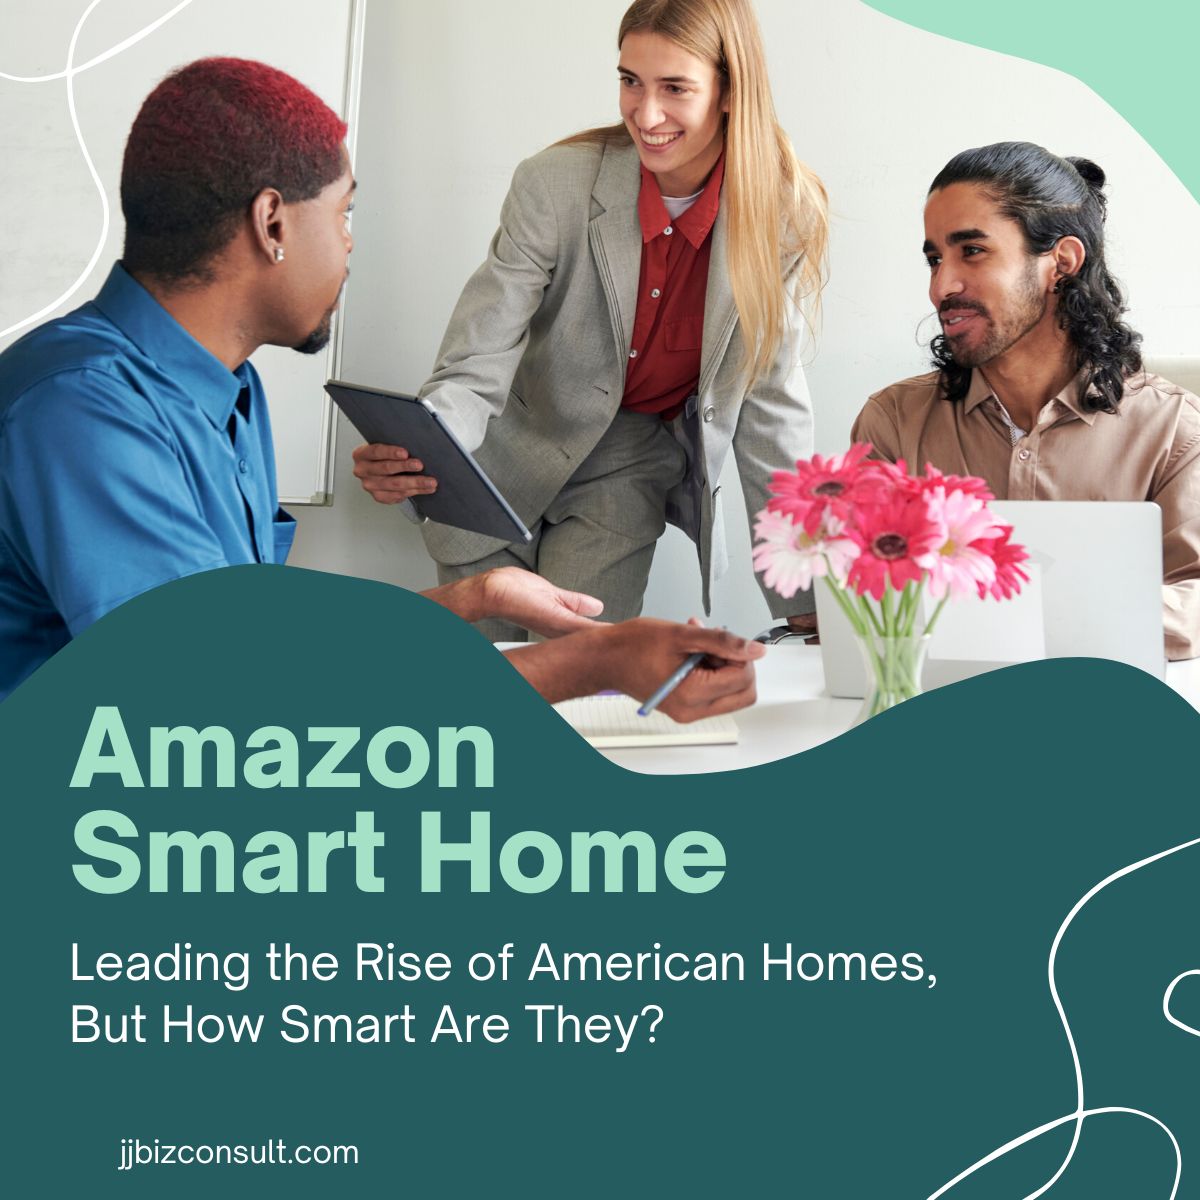 Amazon Smart Home: Leading the Rise of American Homes